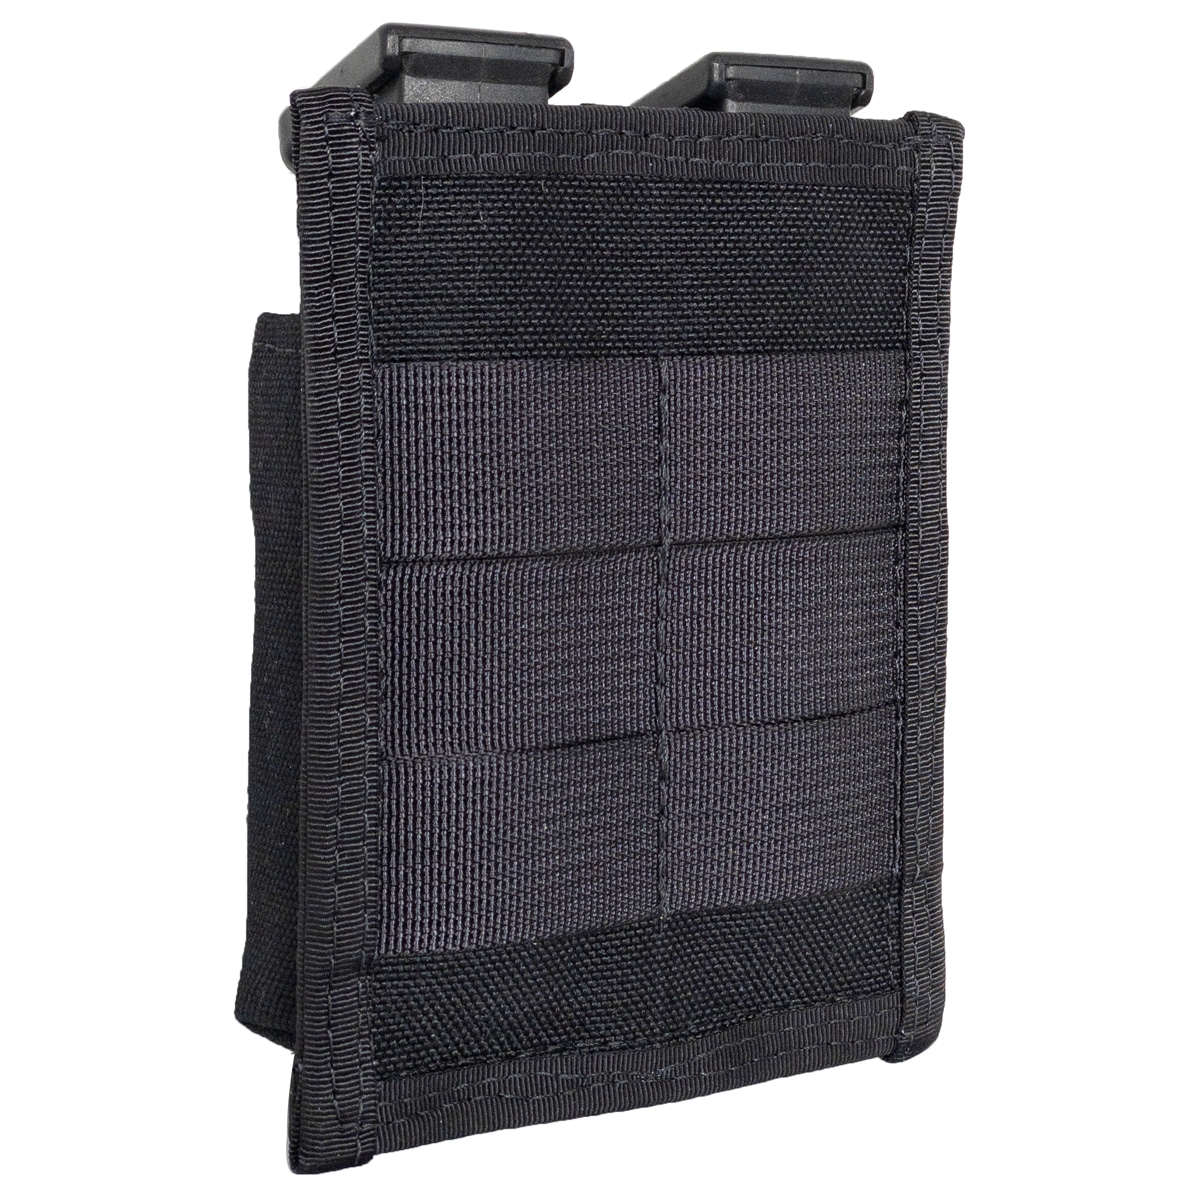 Double Open Top Magazine Molle Pocket for Cowell Tactical Vest